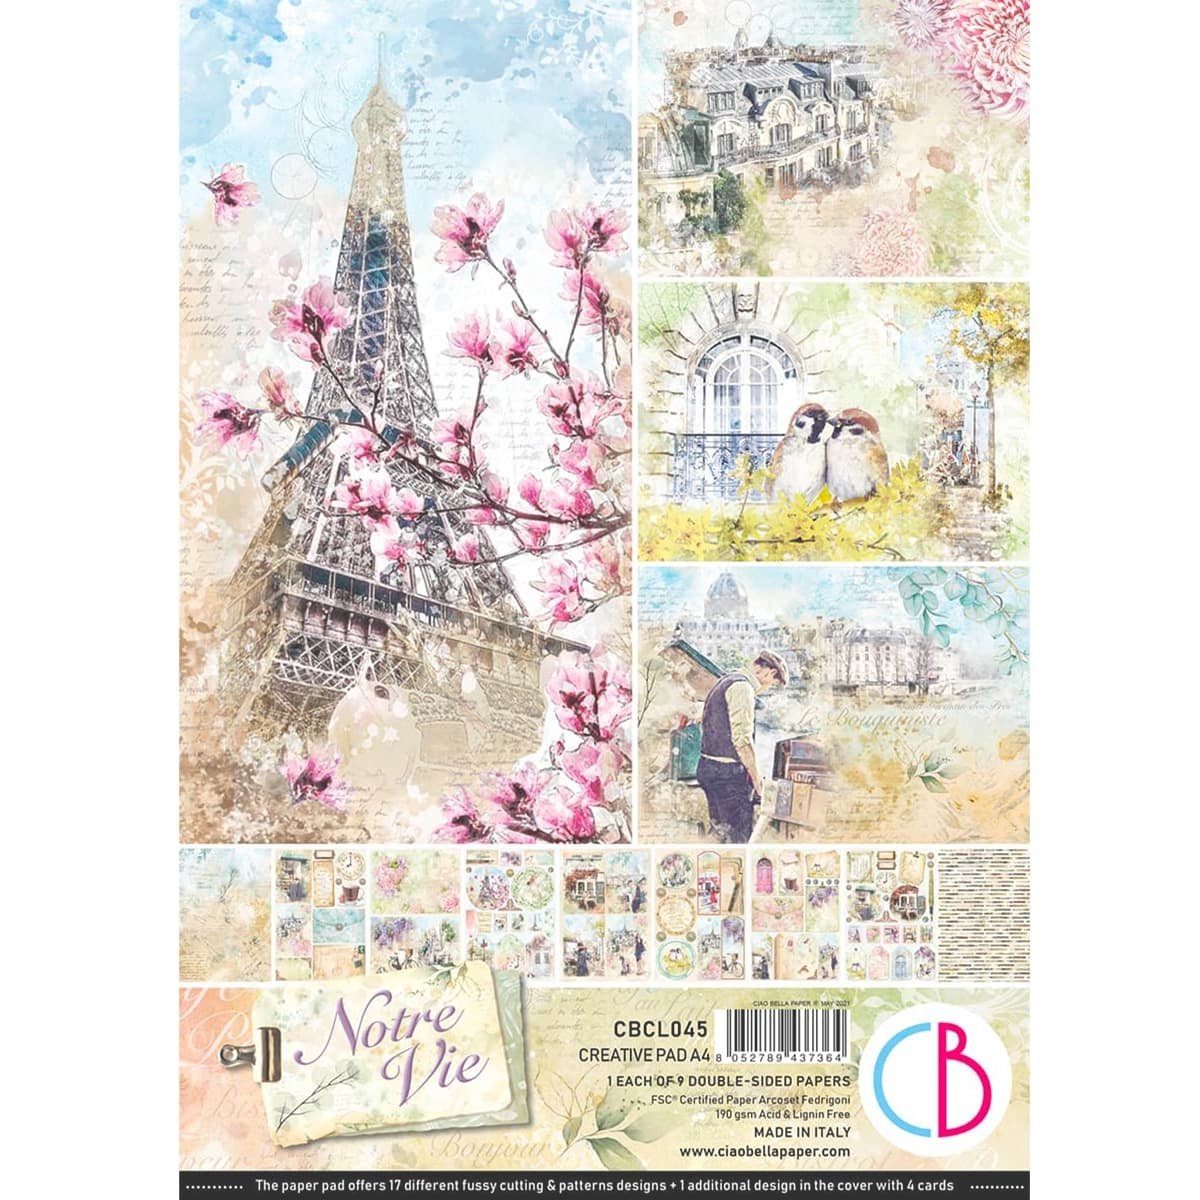 Ciao Bella - Notre Vie - Double Sided Paper - A4 - Pack of 9 Ciao Bella